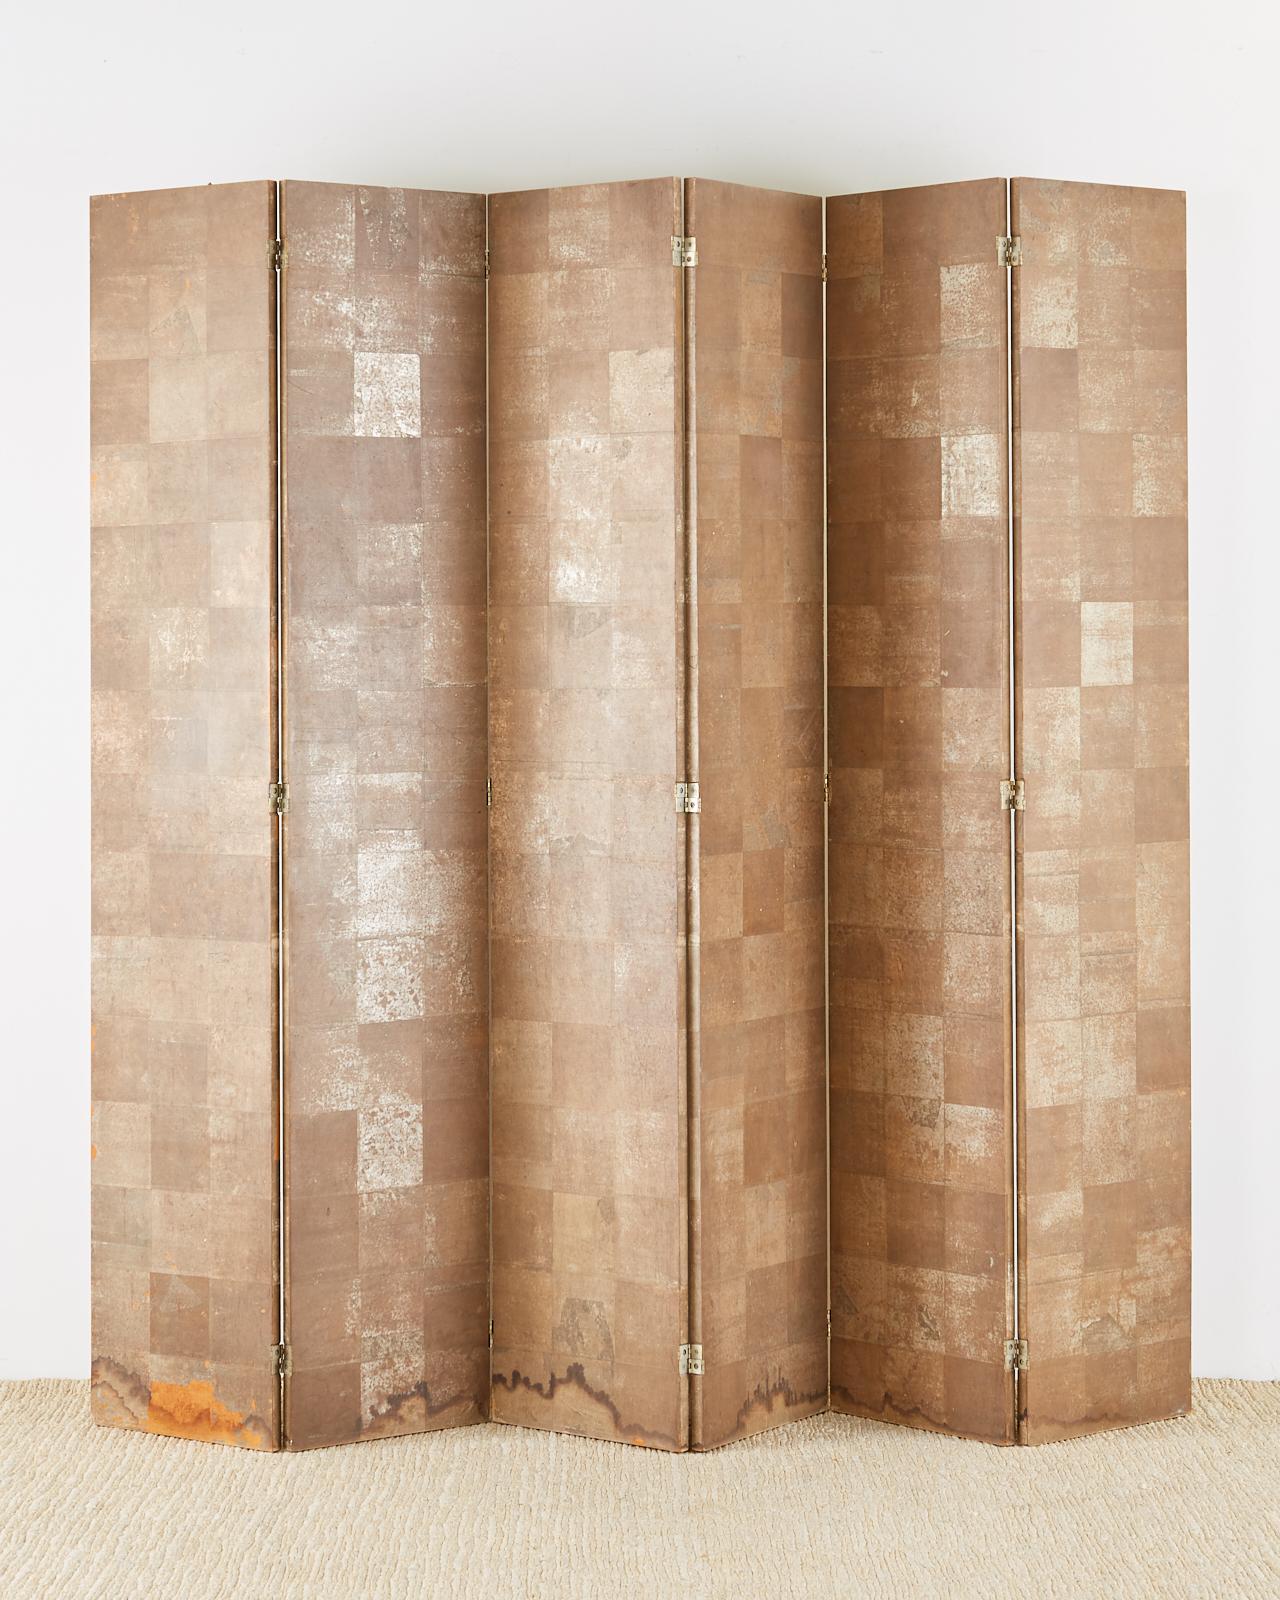 Chinoiserie Six-Panel Screen Inspired by Robert Crowder 13